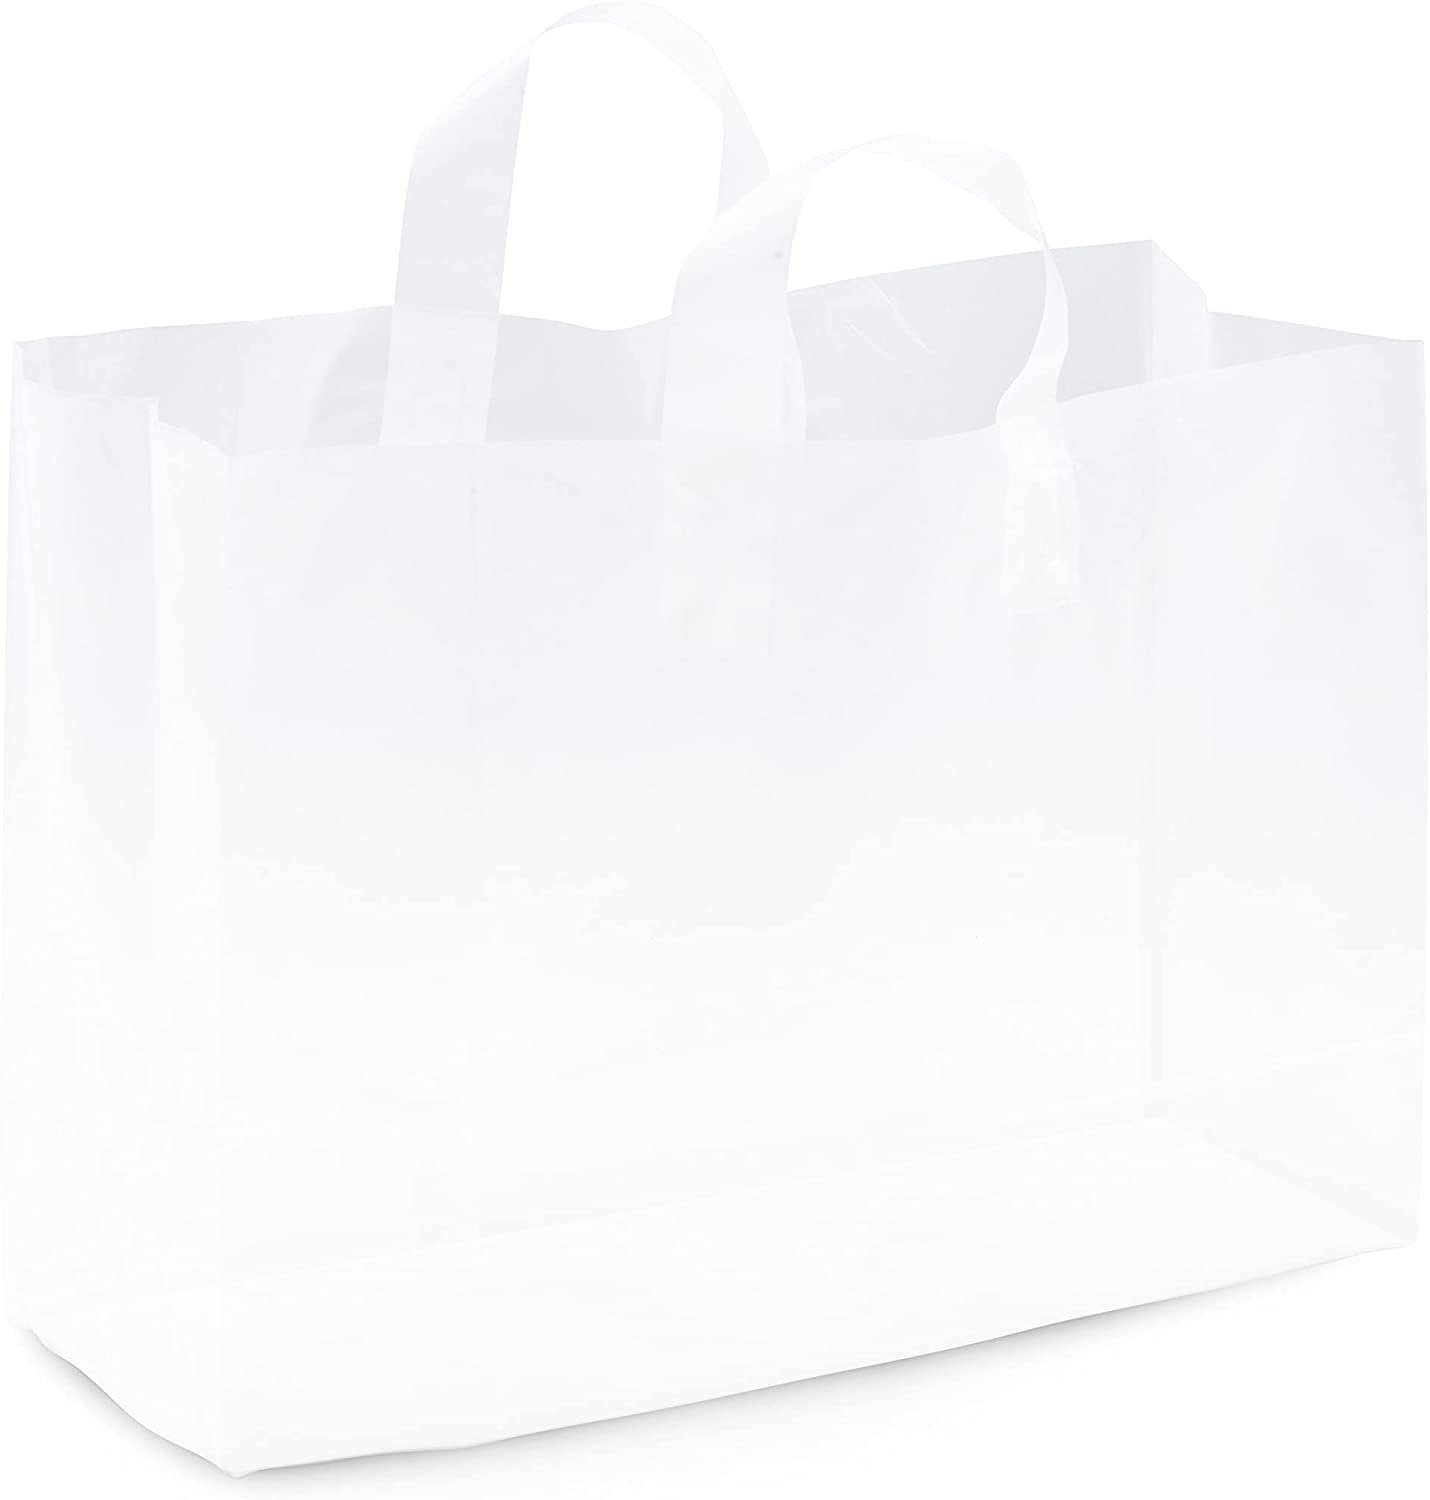 Prime Line Packaging Plastic Bag with Handles, Extra Large Frosted White  Gift Bags 16x6x12 50 Pack